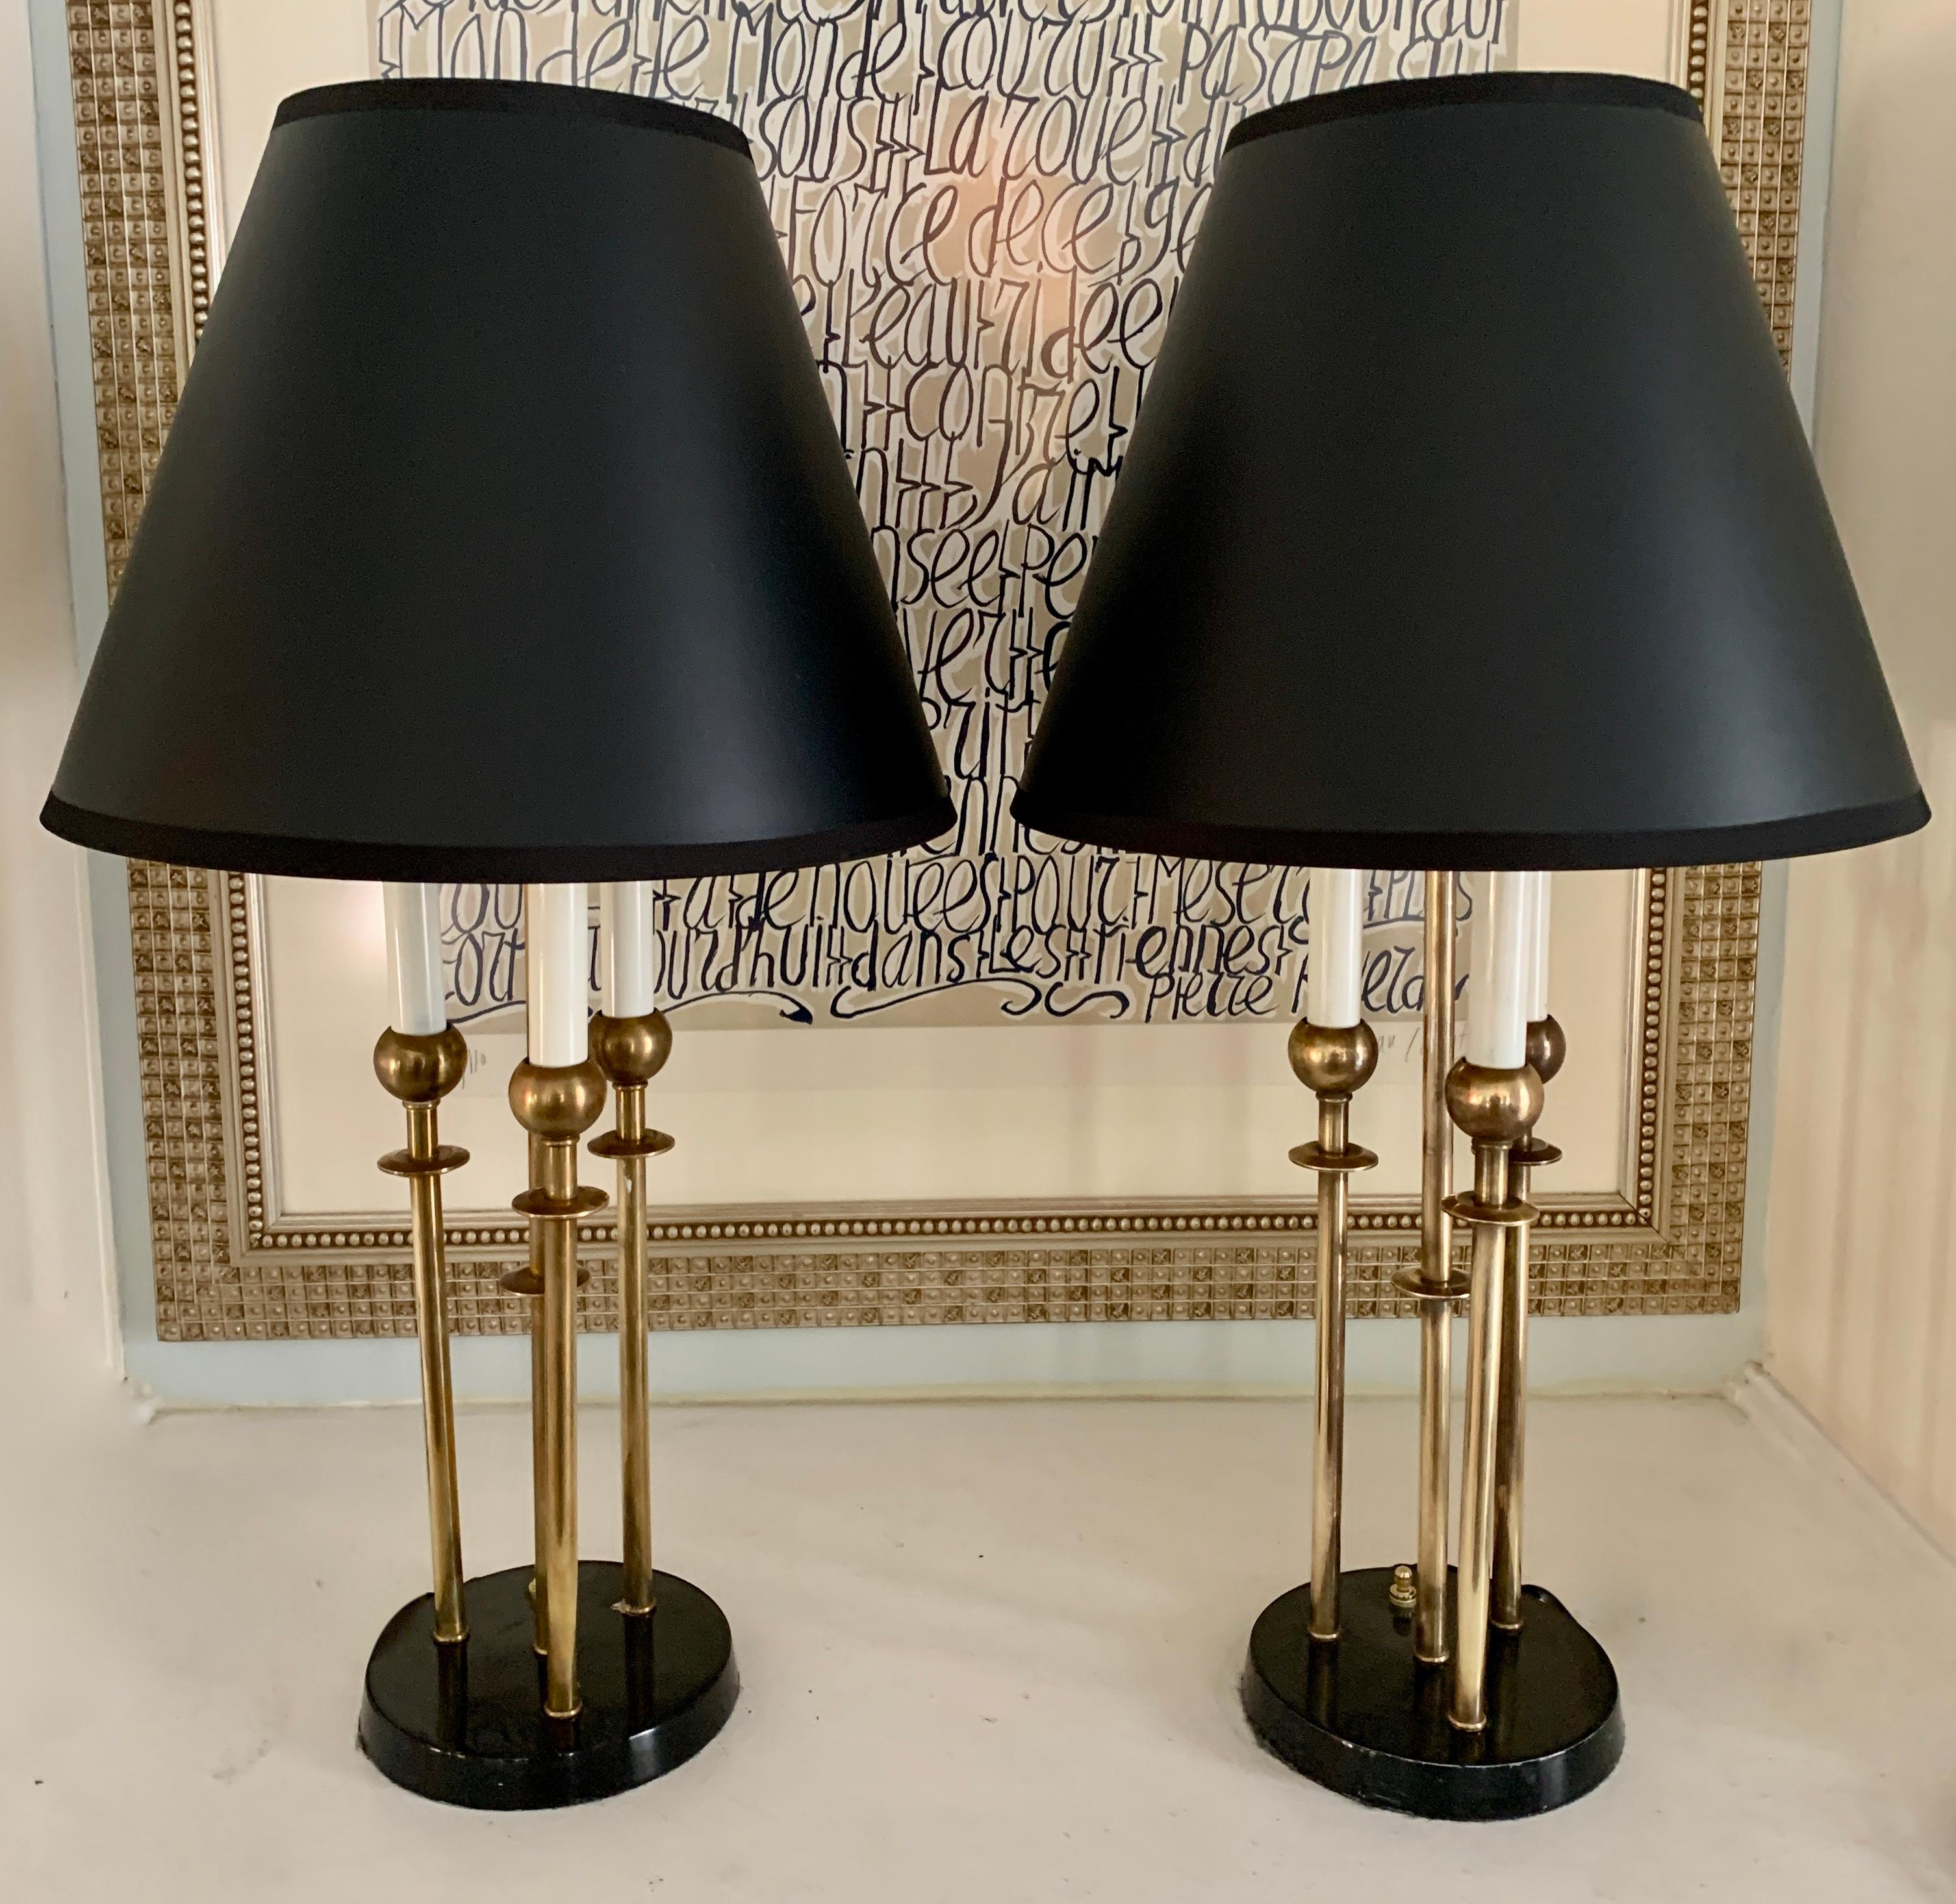 A pair of brass lamps with three brass candlesticks, and midcentury detailing. The lamps come with shown black shades and have been rewired with 6' silk cords. A complement to any living room, bedroom or guest room.

Shades are cone shaped and 7